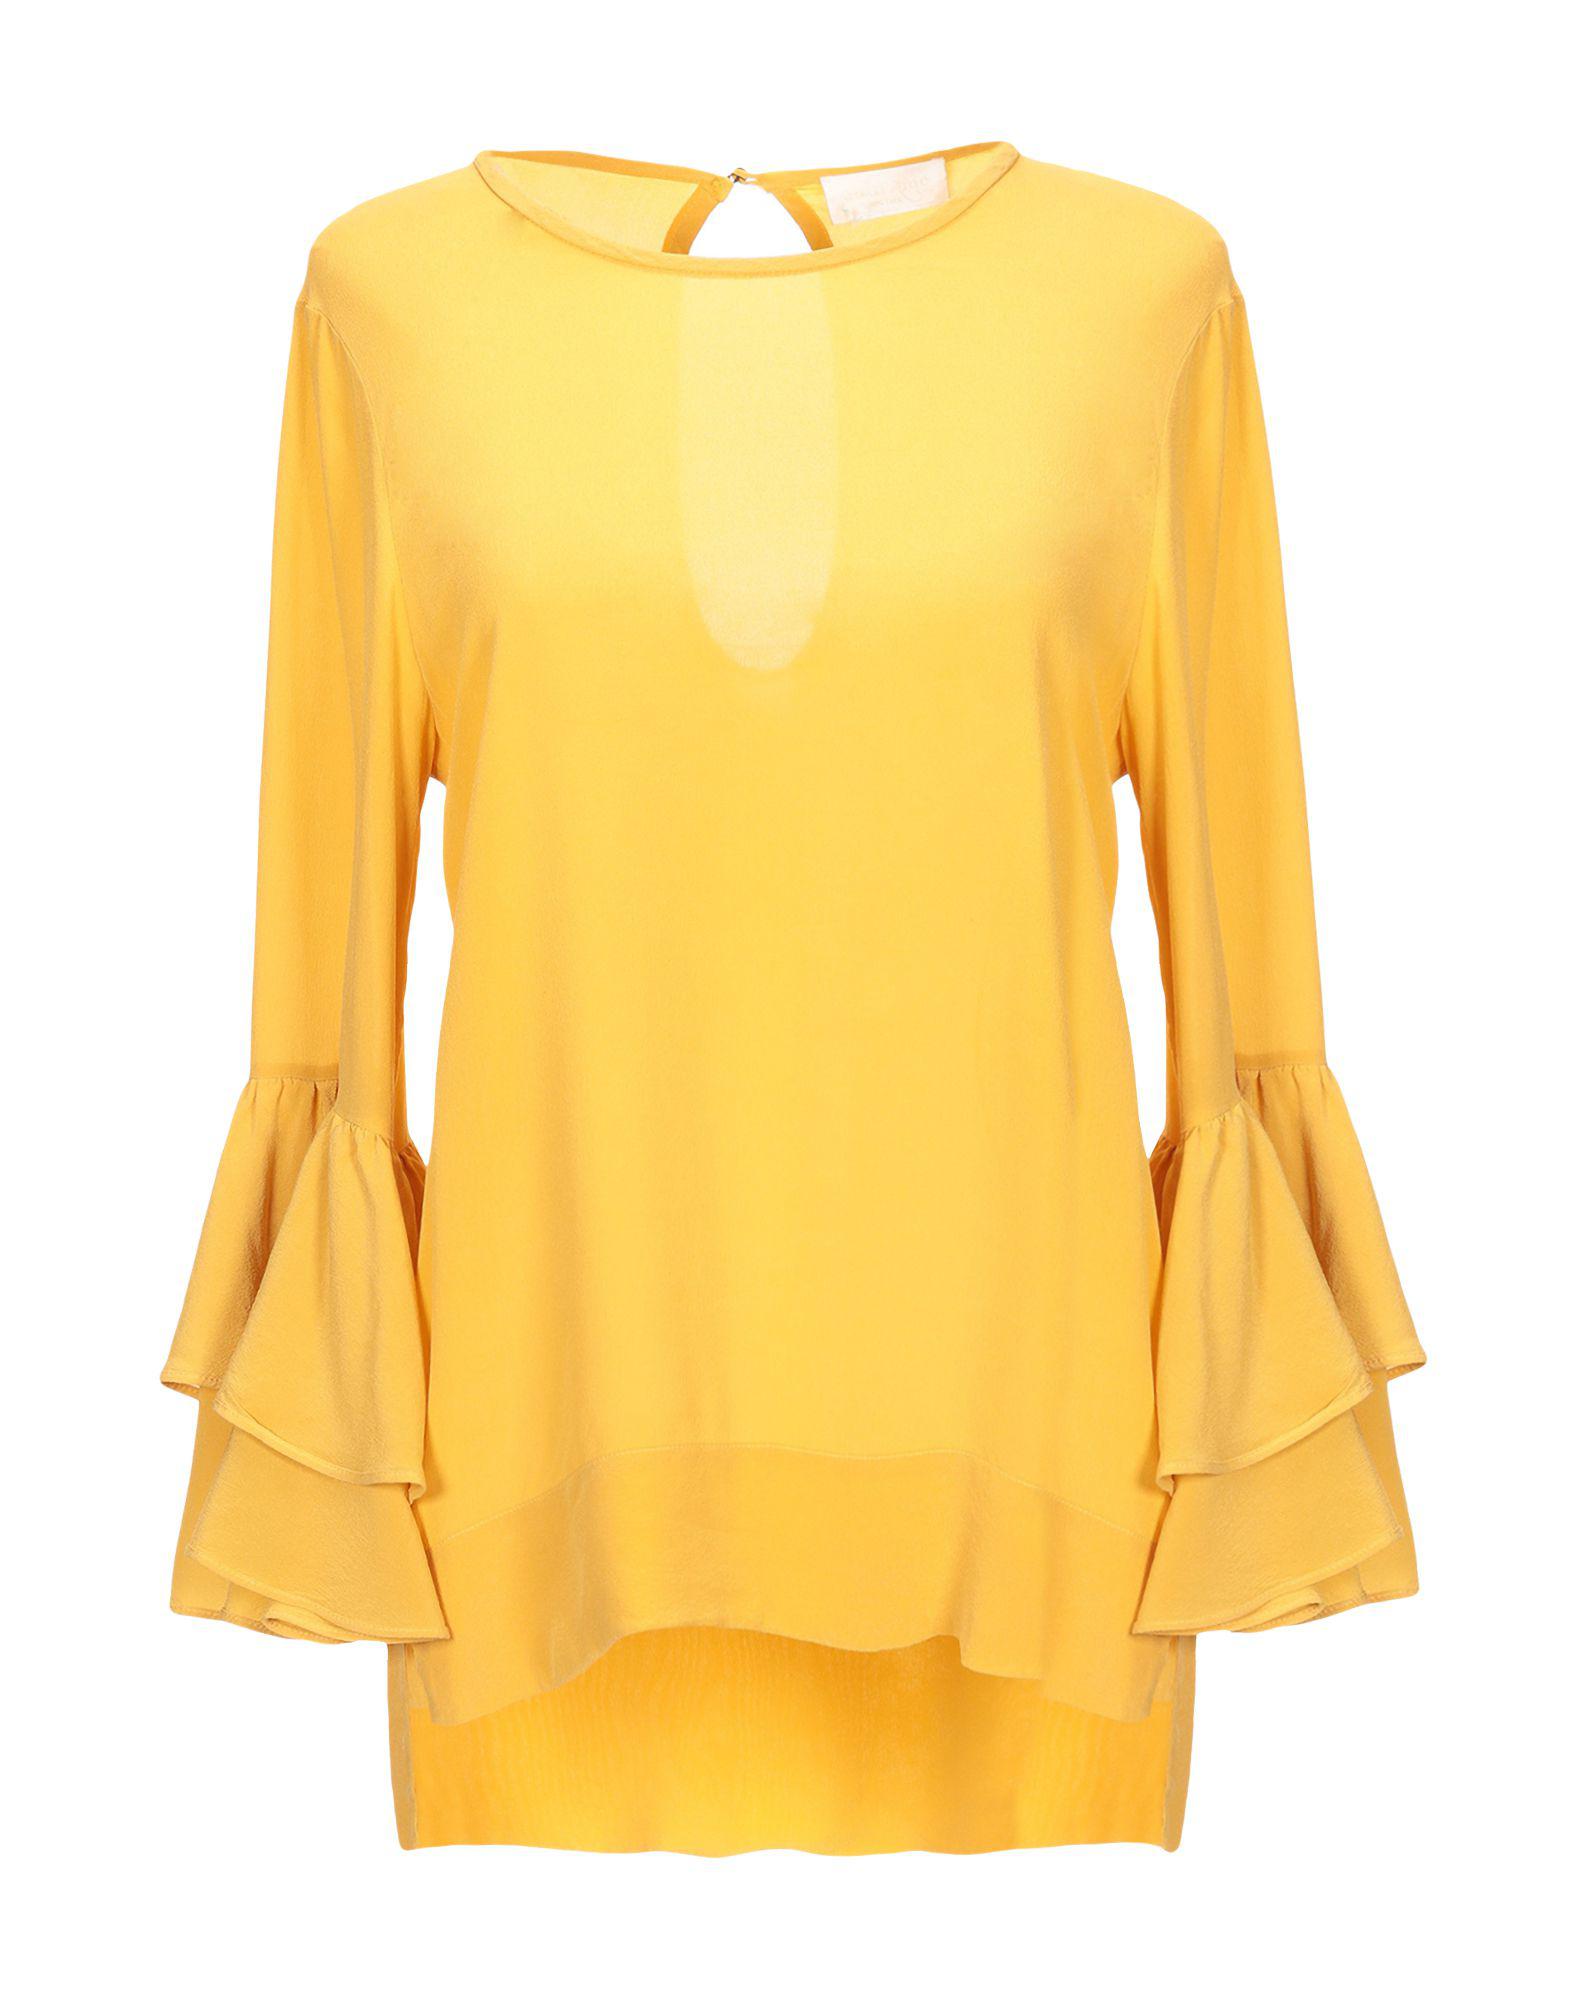 Ottod'Ame Silk Blouse in Yellow - Lyst